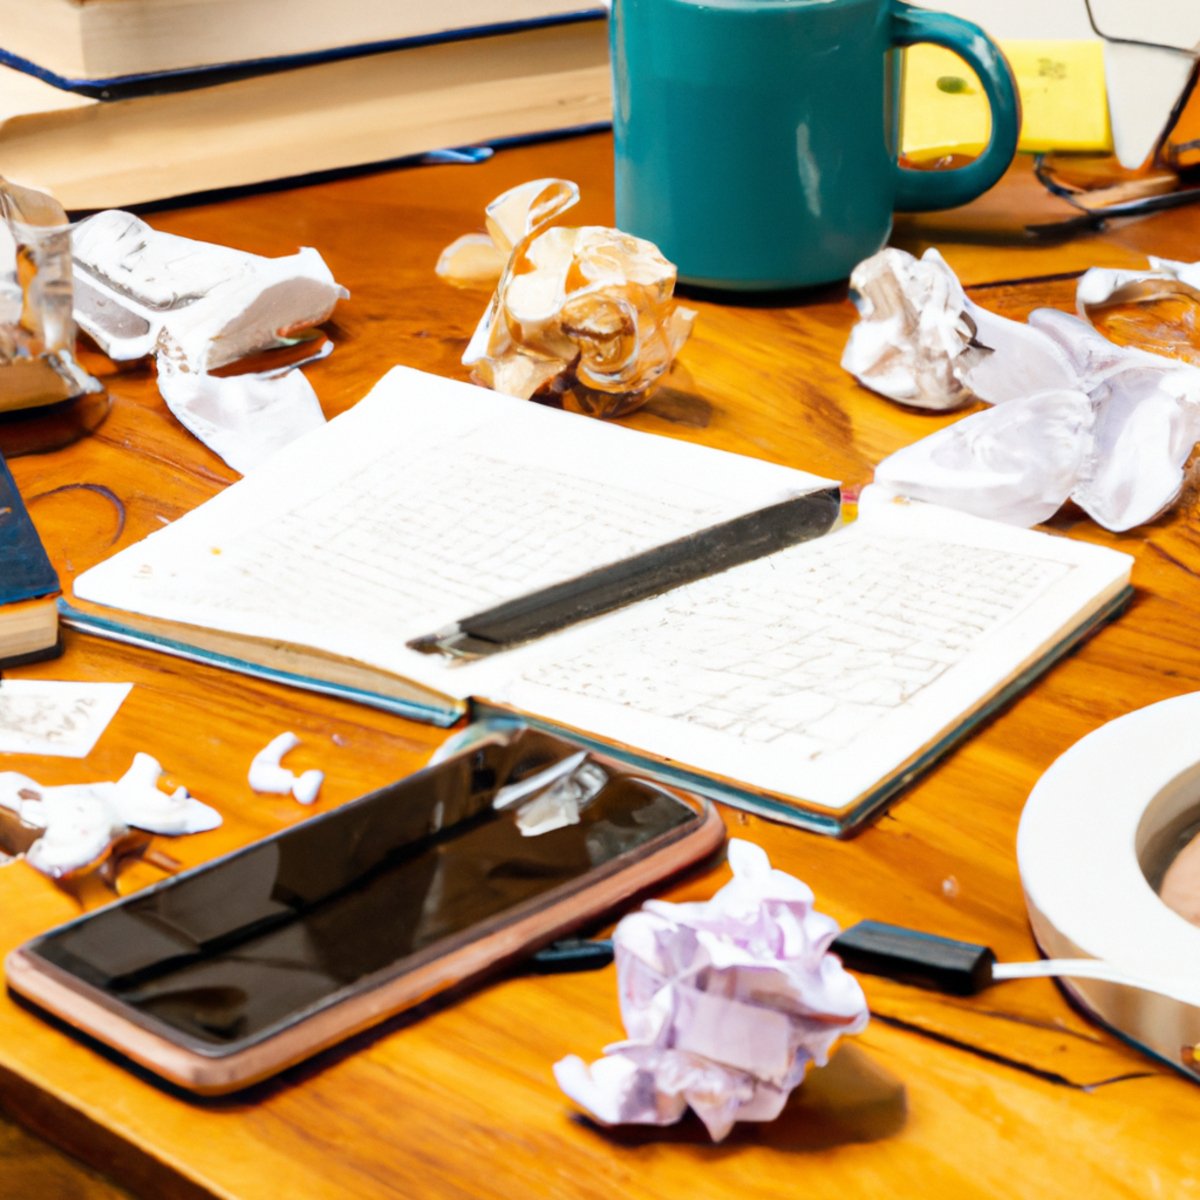 Stress management techniques - Cluttered desk with open notebook, coffee mug, crumpled papers, tangled charger, overflowing bookshelf - visual of mental clutter.